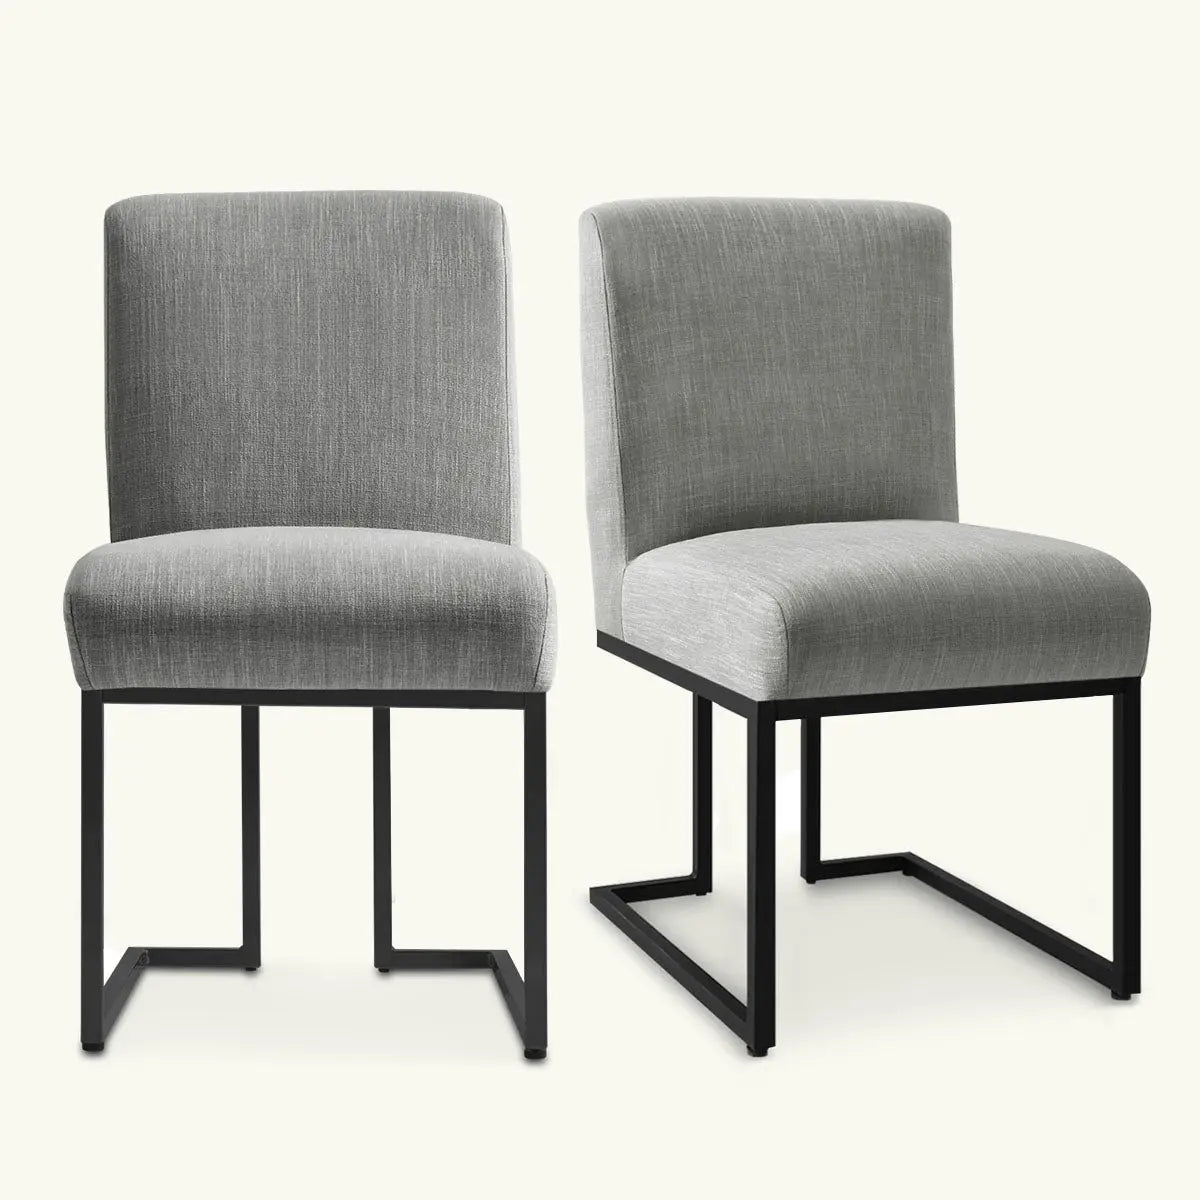 Maison Dining Chair with Black Legs - Set of 2 for Modern Dining Room